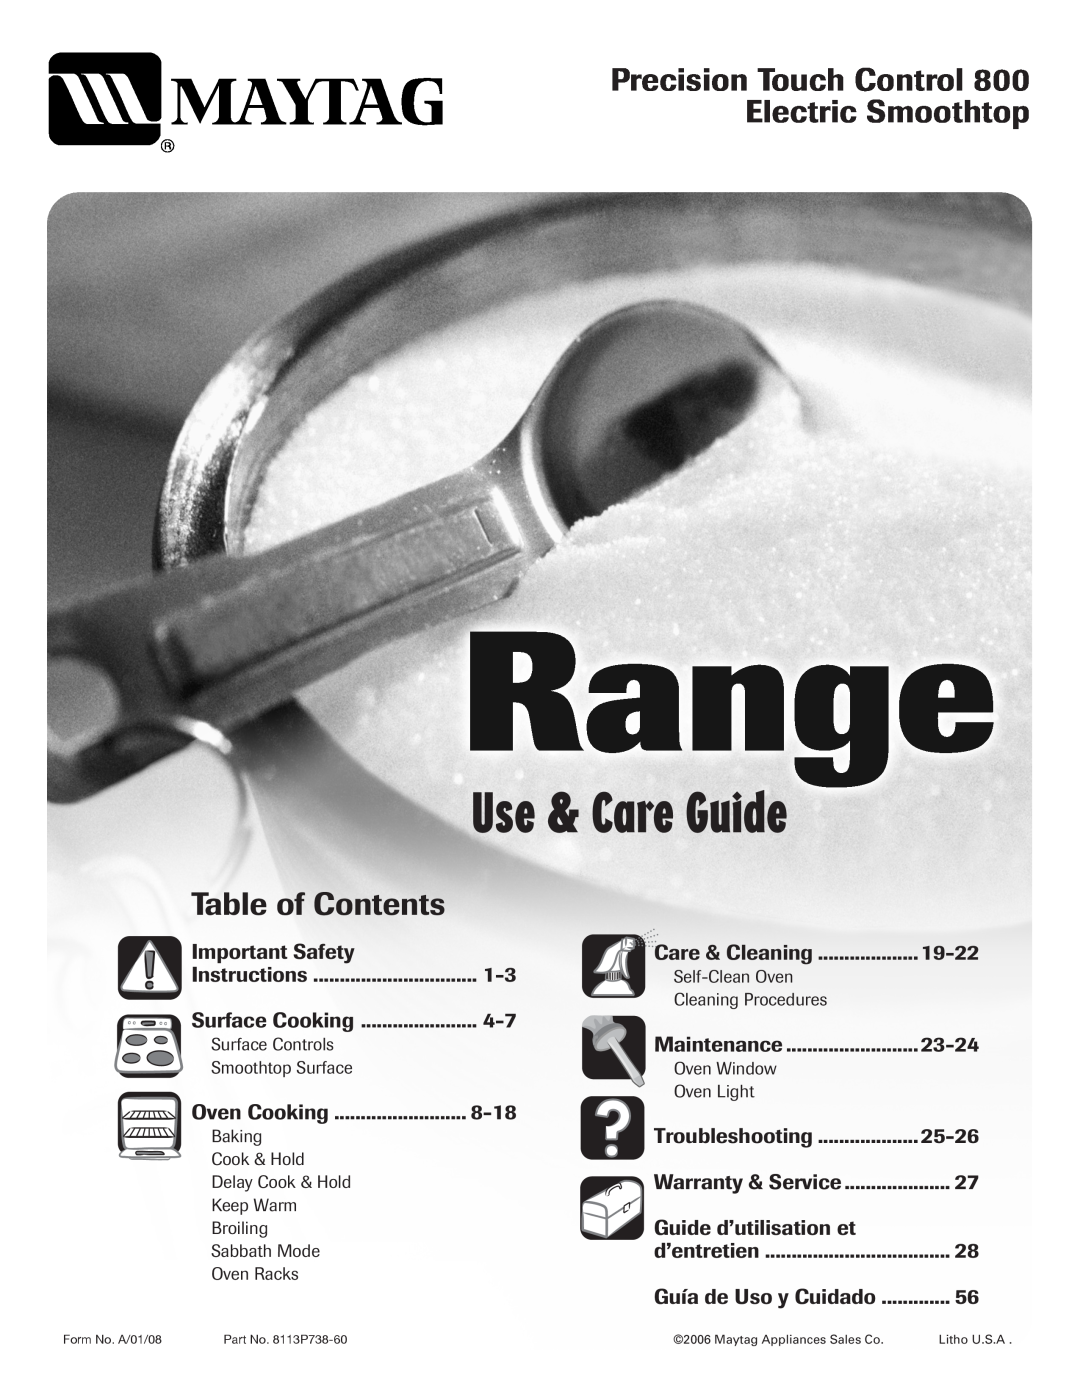 Maytag MER5875RAF manual Use & Care Guide, Precision Touch Control Electric Smoothtop, Table of Contents 